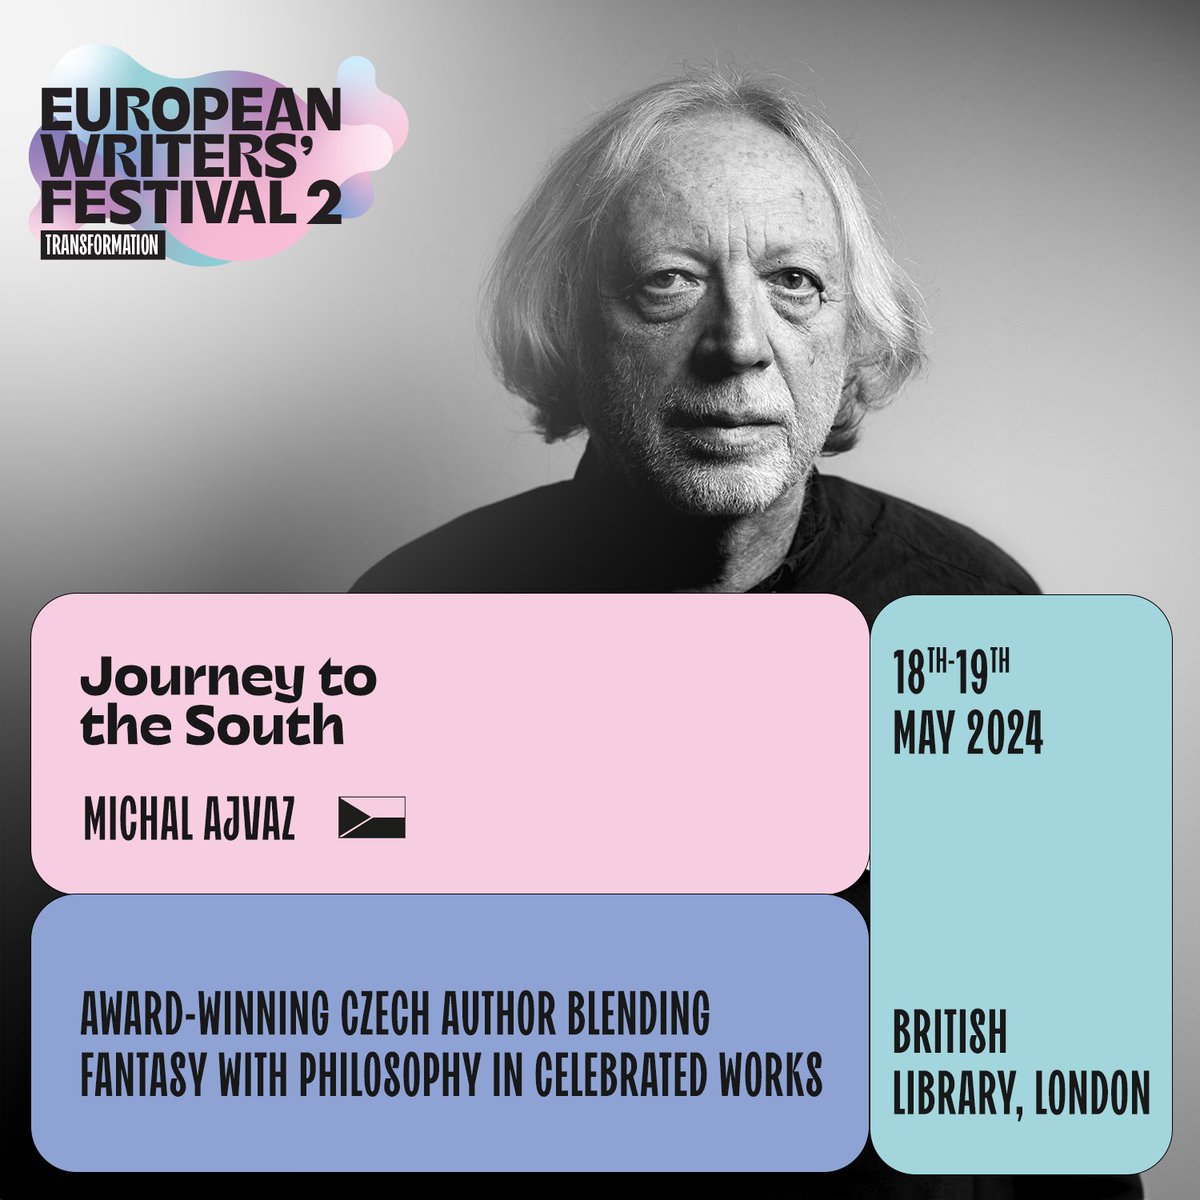 EUROPEAN WRITERS' FESTIVAL returns to @britishlibrary 18-19 May to present 30 brilliant authors from across Europe! Czech author Michal Ajvaz takes part in the Breaking Boundaries panel on Sunday 19 May from 1.30pm. london.czechcentres.cz/en/program/eur… @EUNICLONDON @eurolitnet @Czechlit1